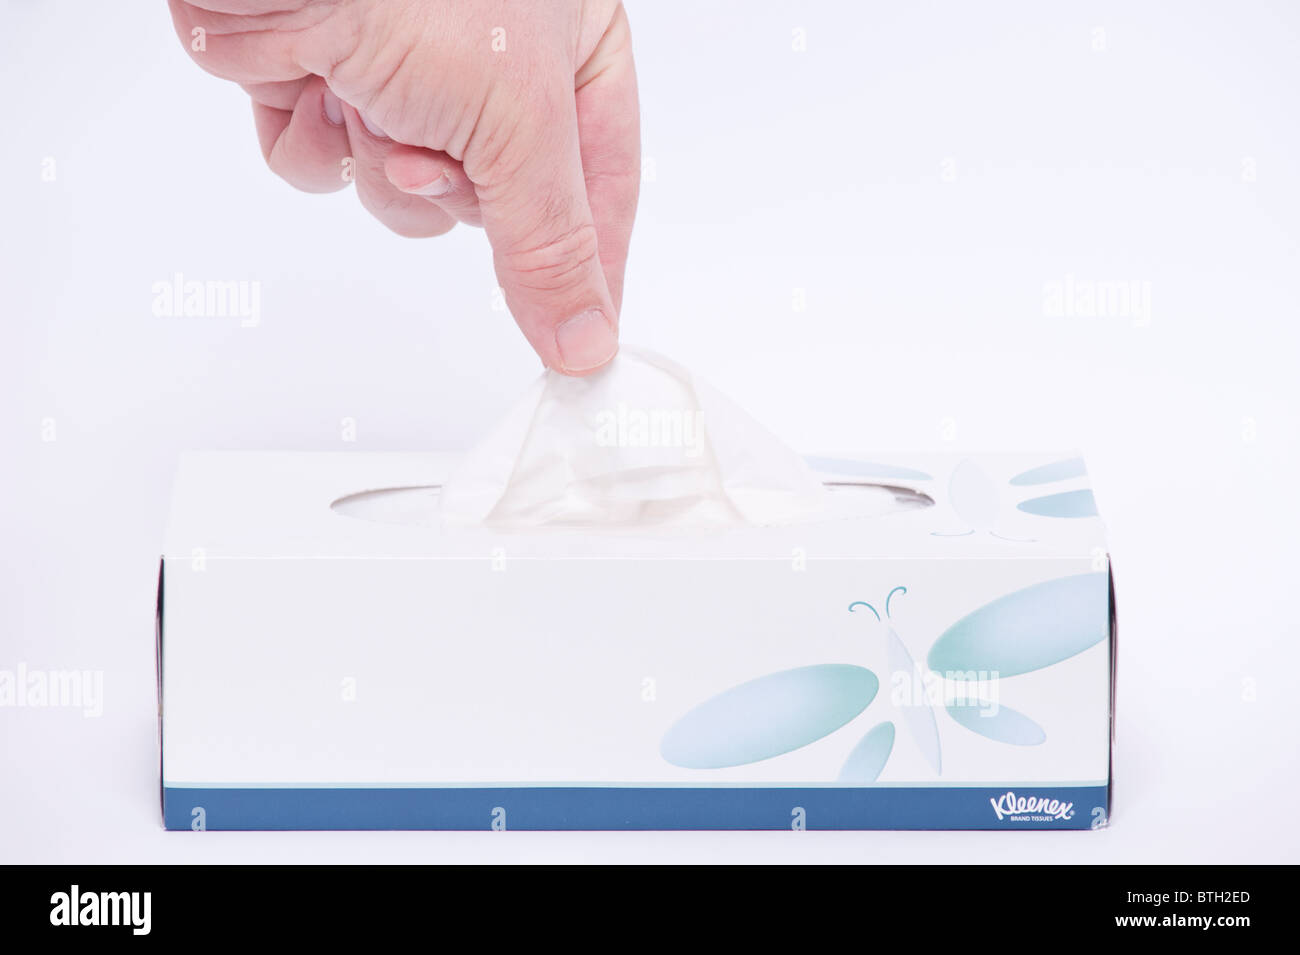 A MODEL RELEASED picture of someone taking a tissue from a box of Kleenex original brand tissues on a white background Stock Photo